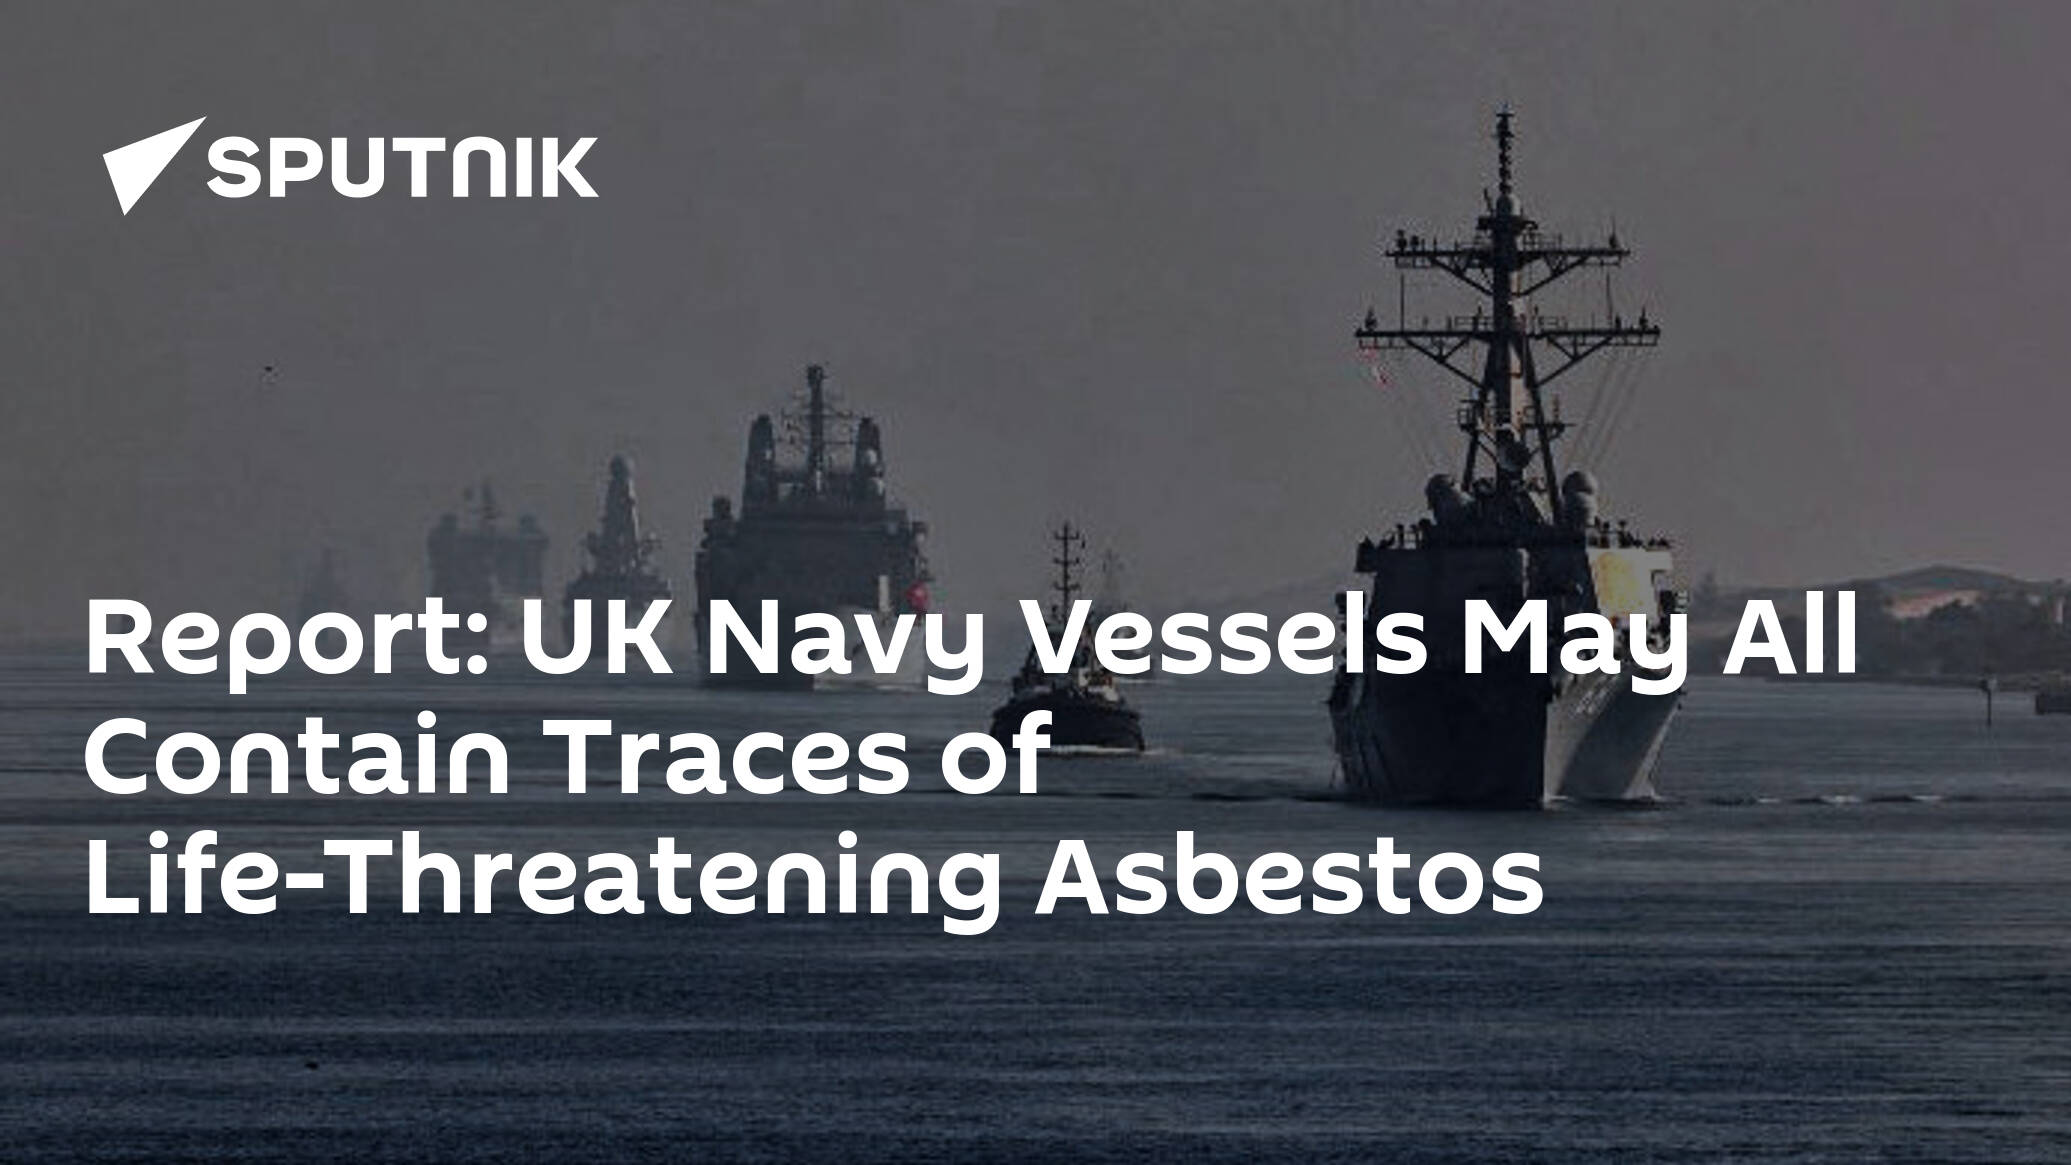 Report: UK Navy Vessels May All Contain Traces of Life-Threatening Asbestos